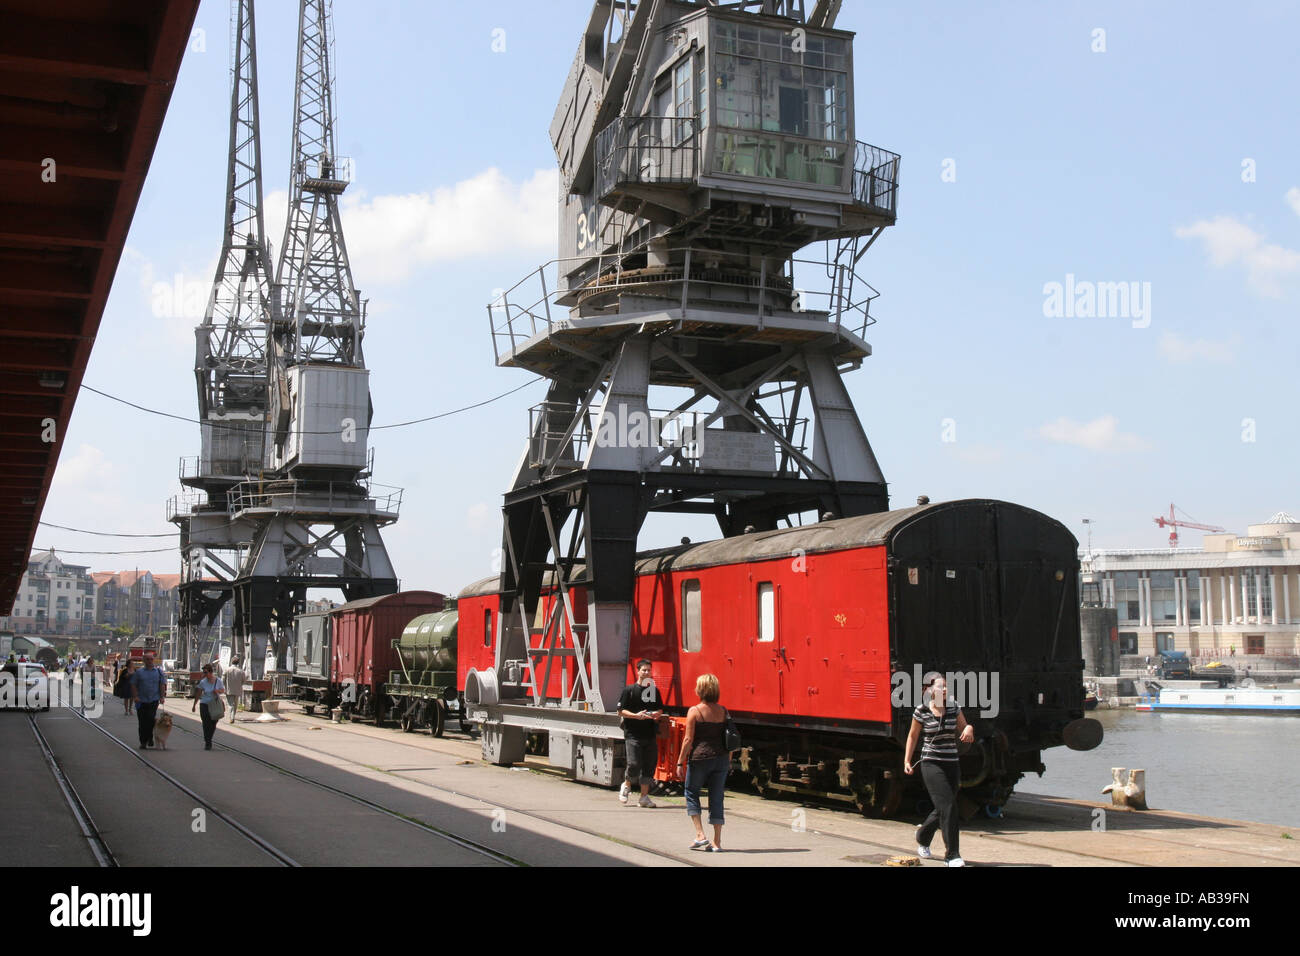 Bristol docks have been regenerated. Old cranes and a  train have been left by the bank as pedestrians pass. Stock Photo